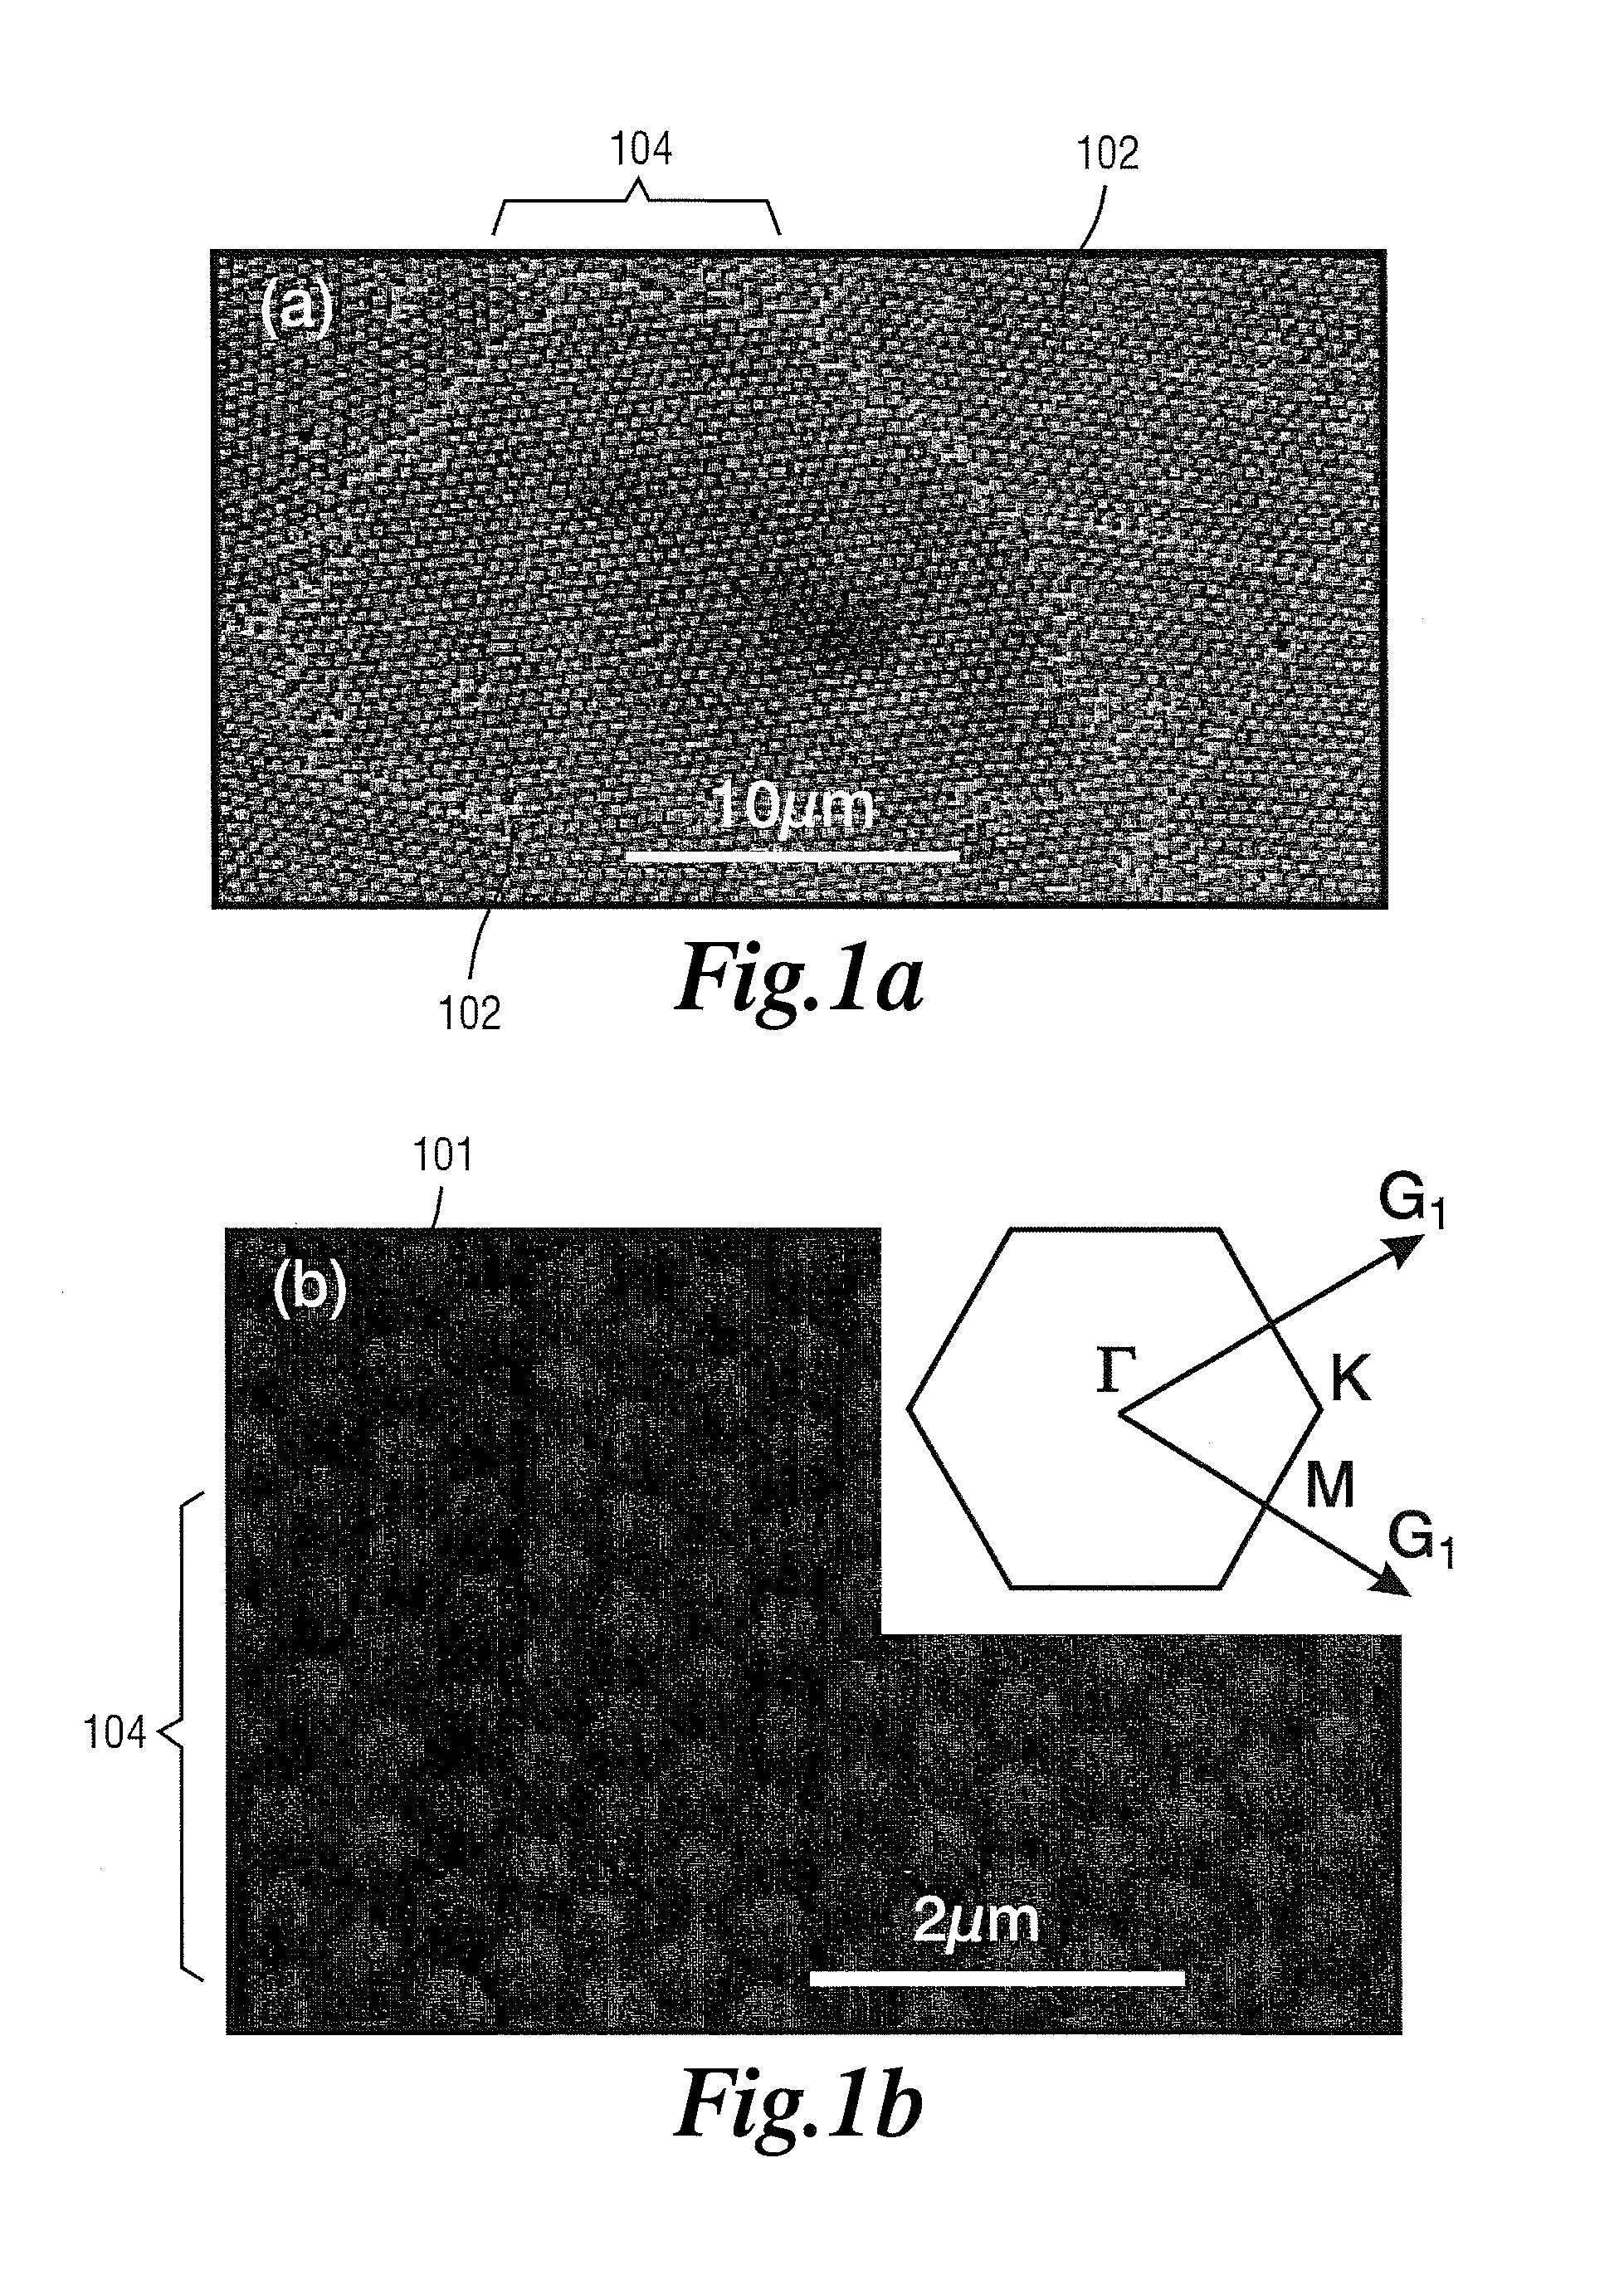 Methods for making and compositions of two dimensional particle arrays